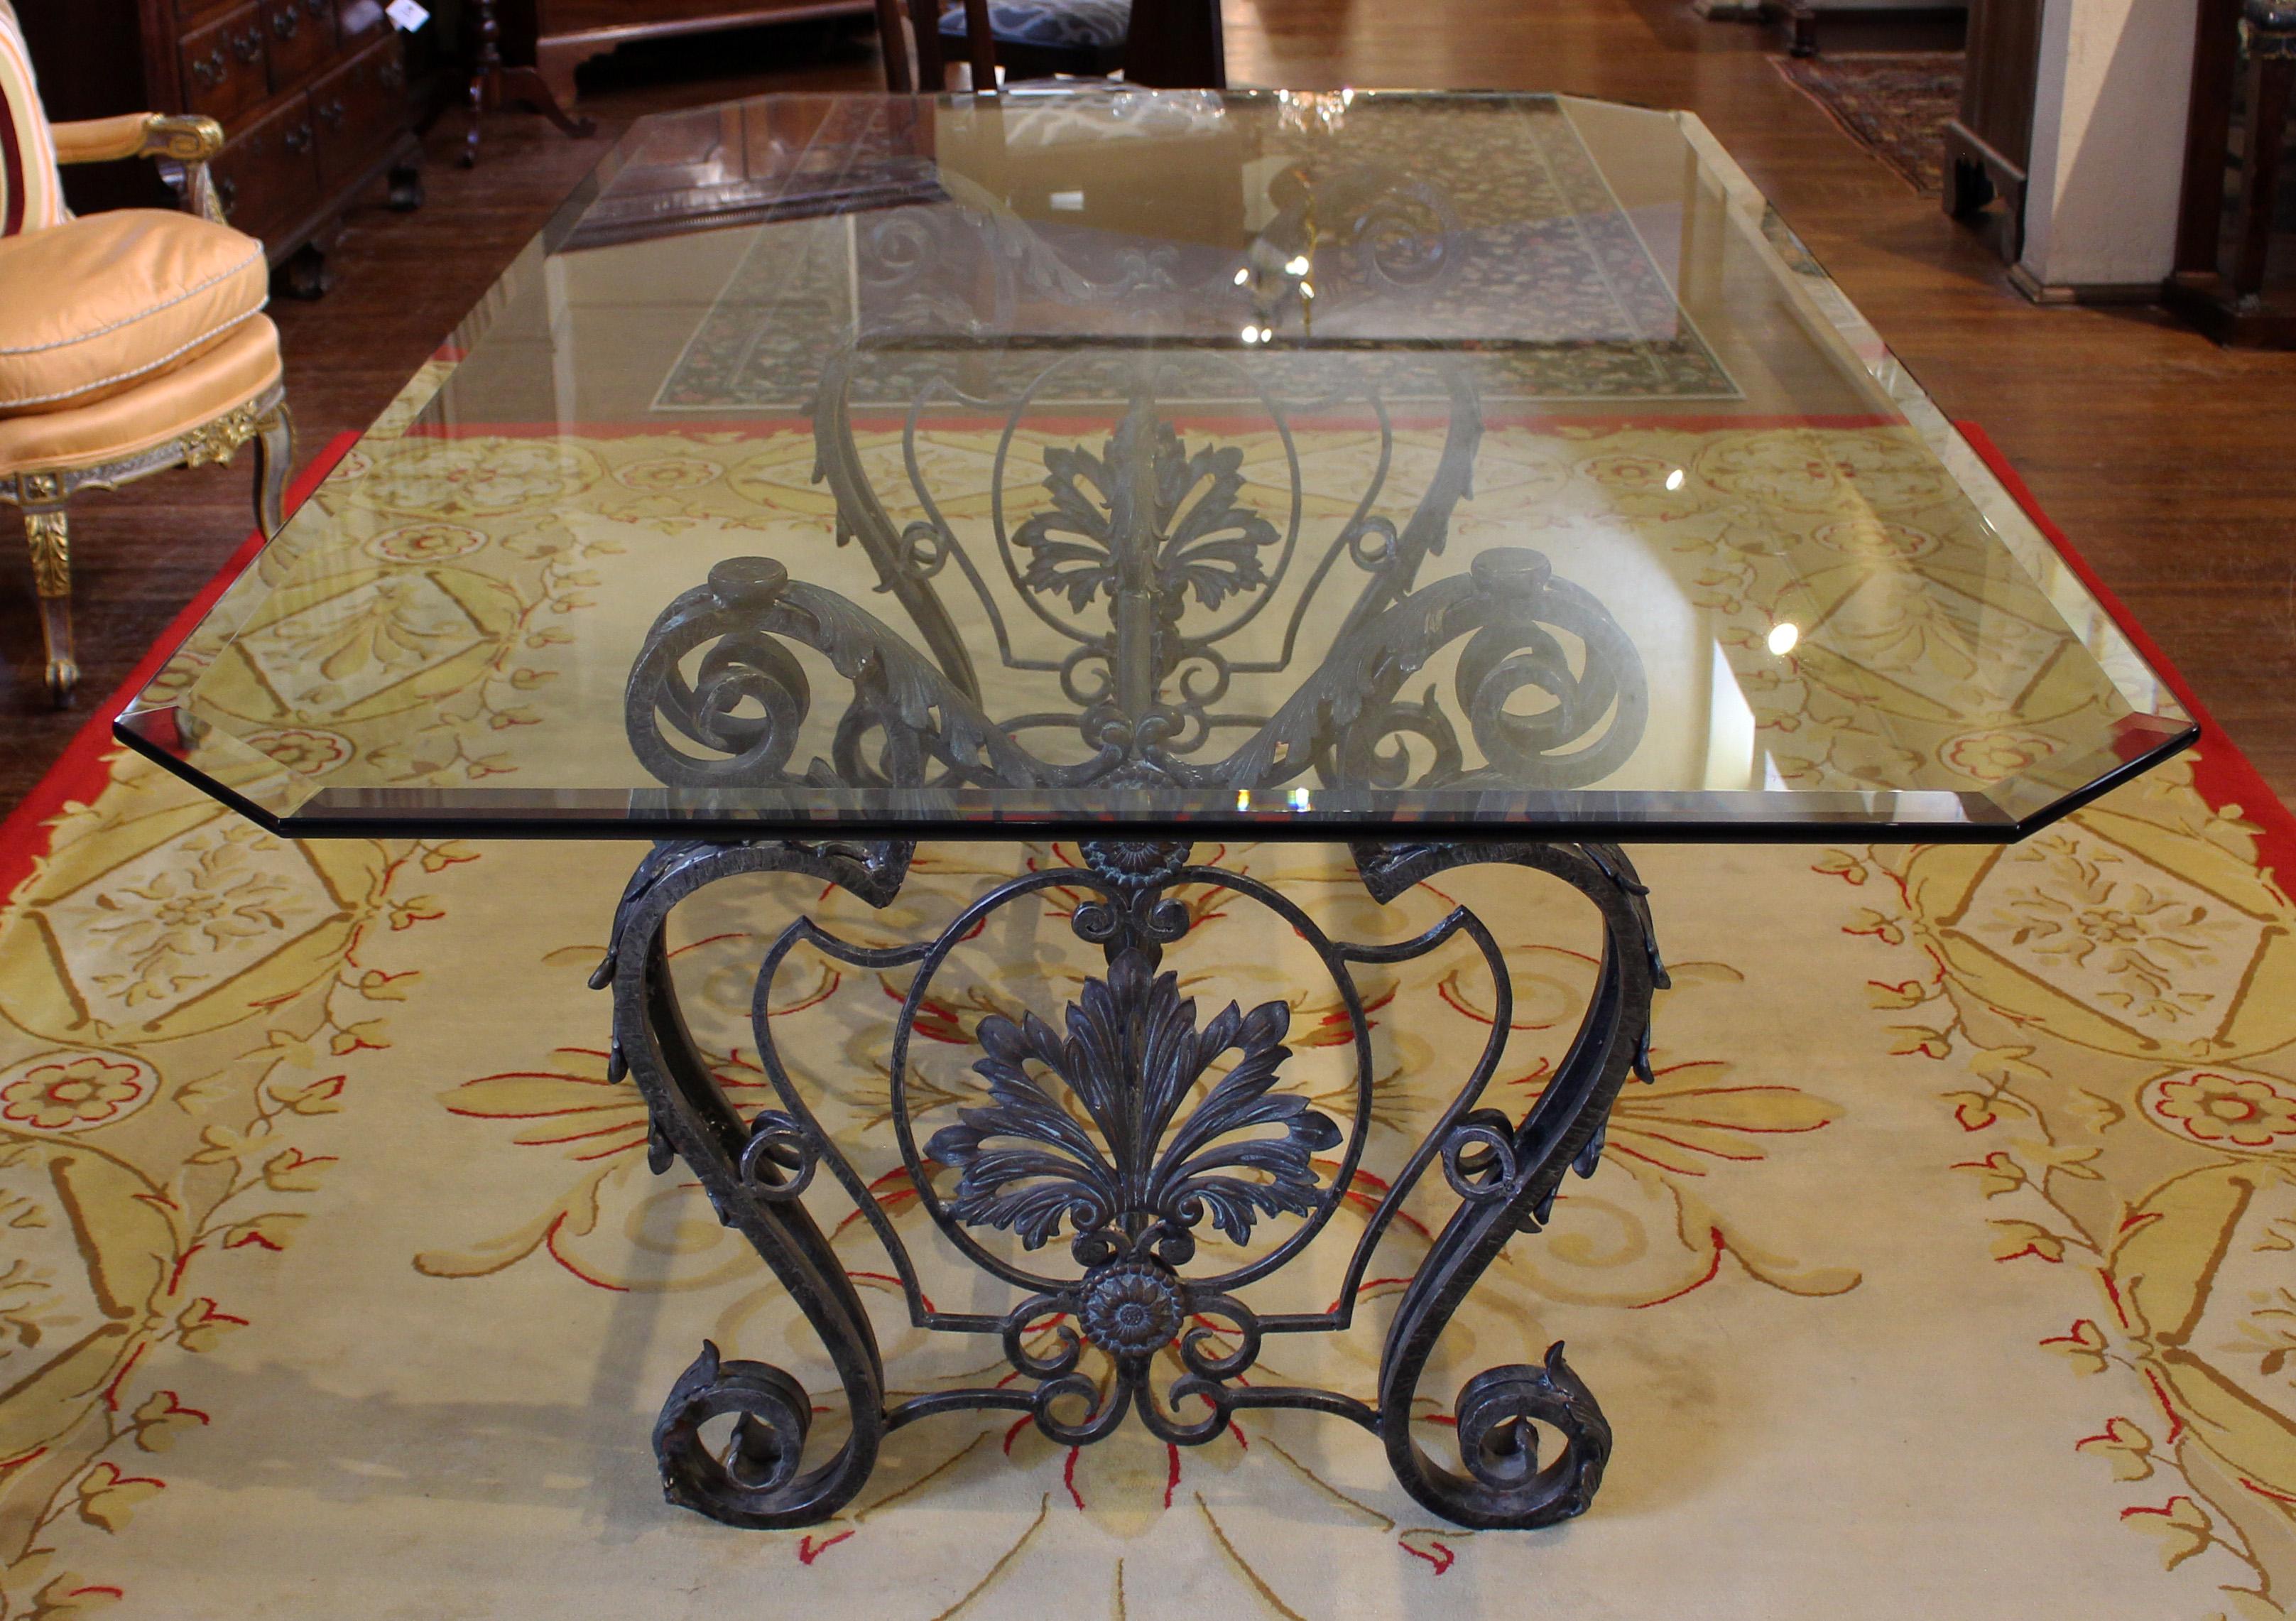 Beaux-Arts cast bronze & wrought iron glass top dining table, French, early 20th century. Undoubtedly this was once a baker's table with a smaller marble top, now with custom thick glass top allowing the full beauty of the base to come through. Each